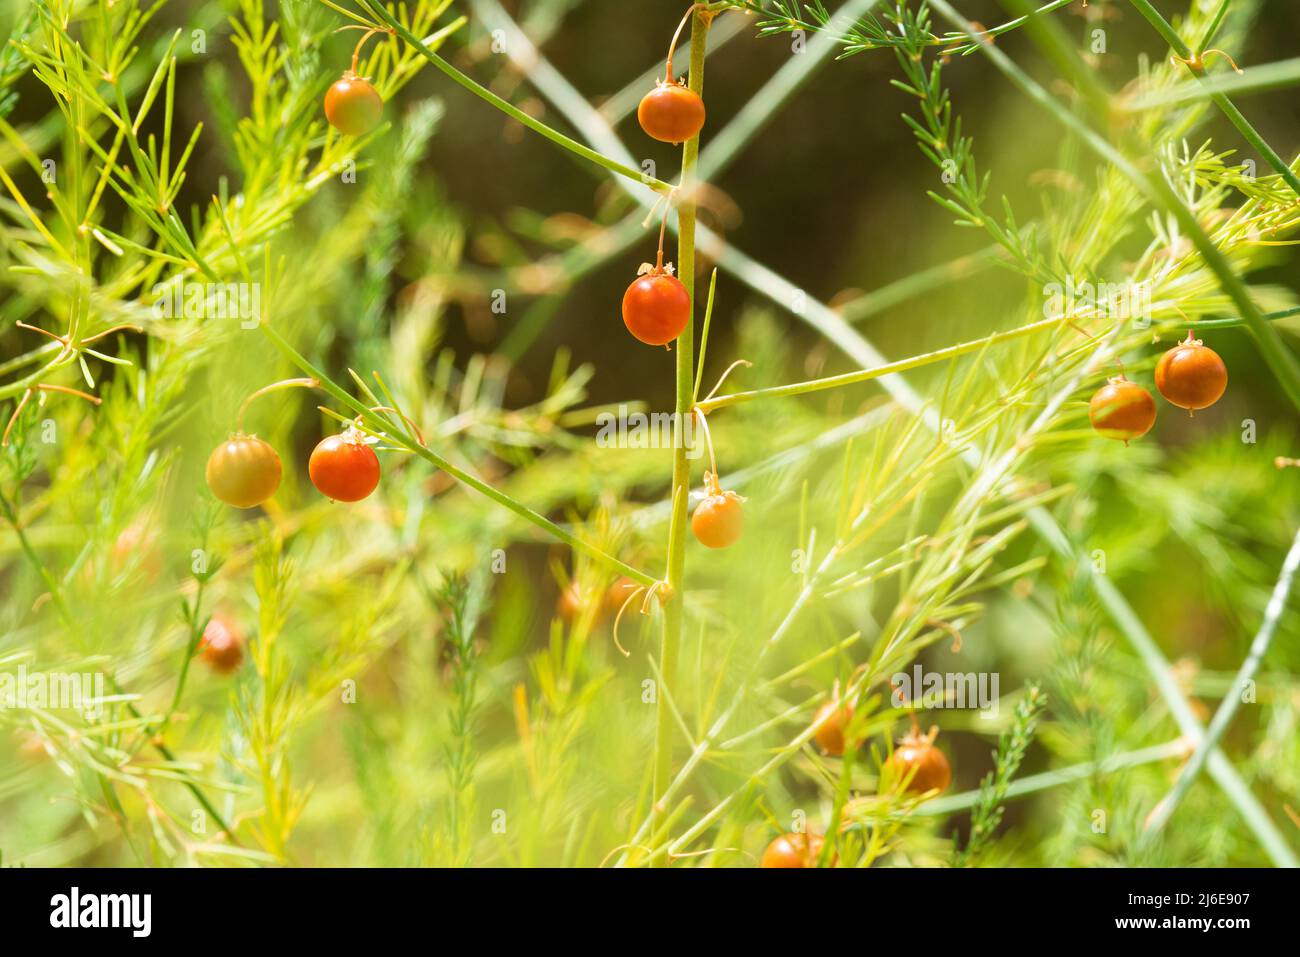 Asparagus plant with berries growing in nature Stock Photo